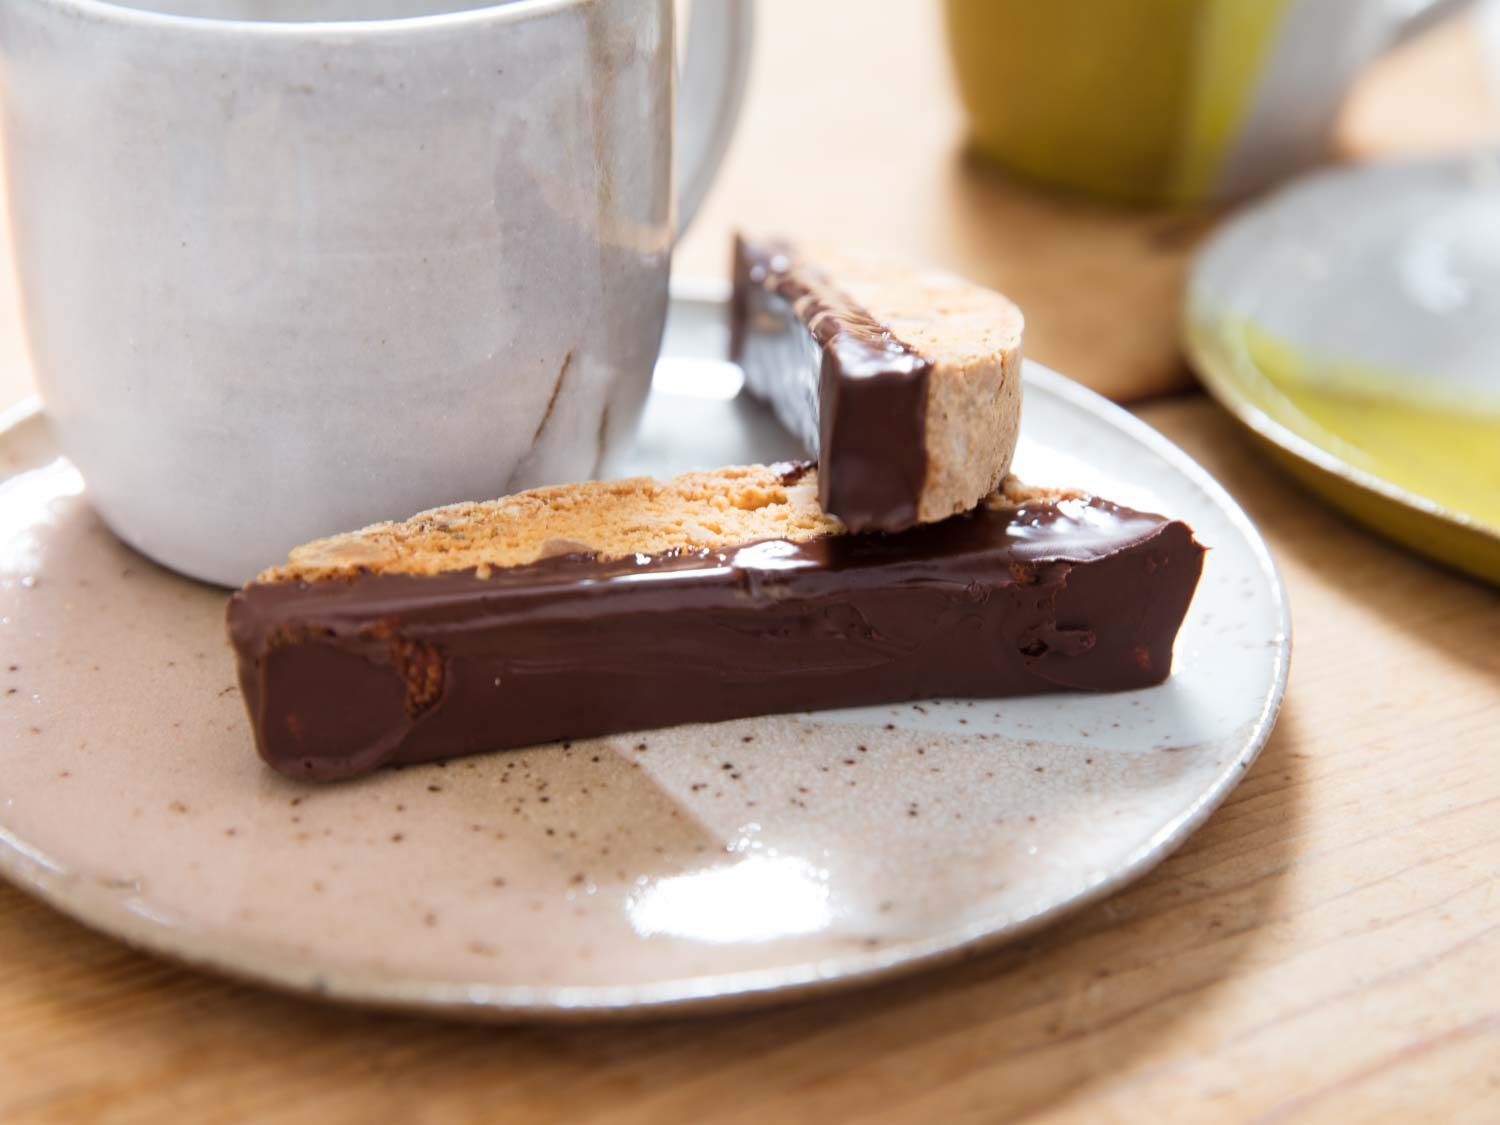 Close-up of a pair of chocolate-dipped biscotti next to a coffee mug.